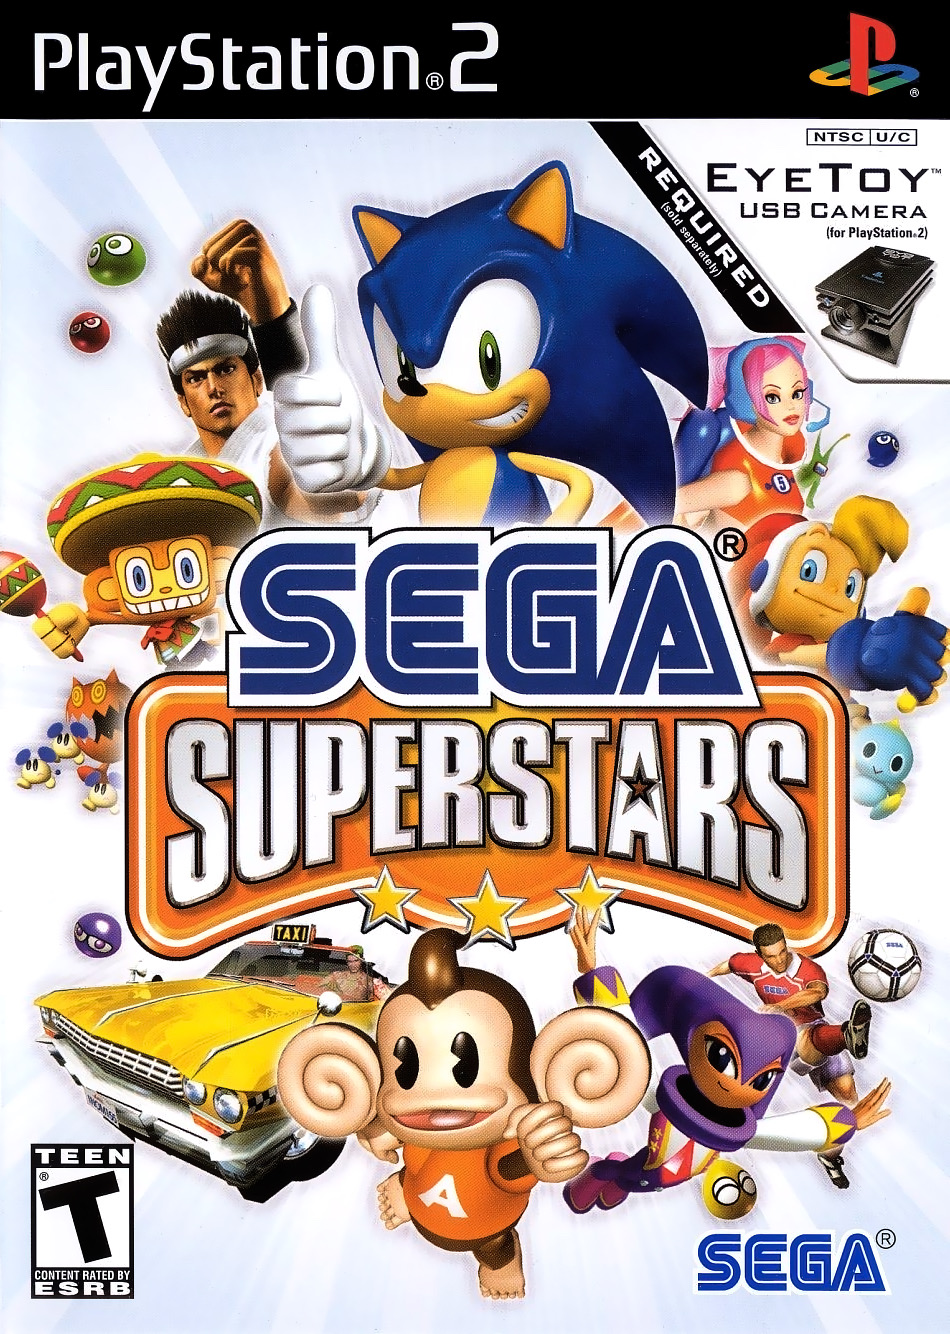 Sonic Superstars (Multi-Language) for PlayStation 4